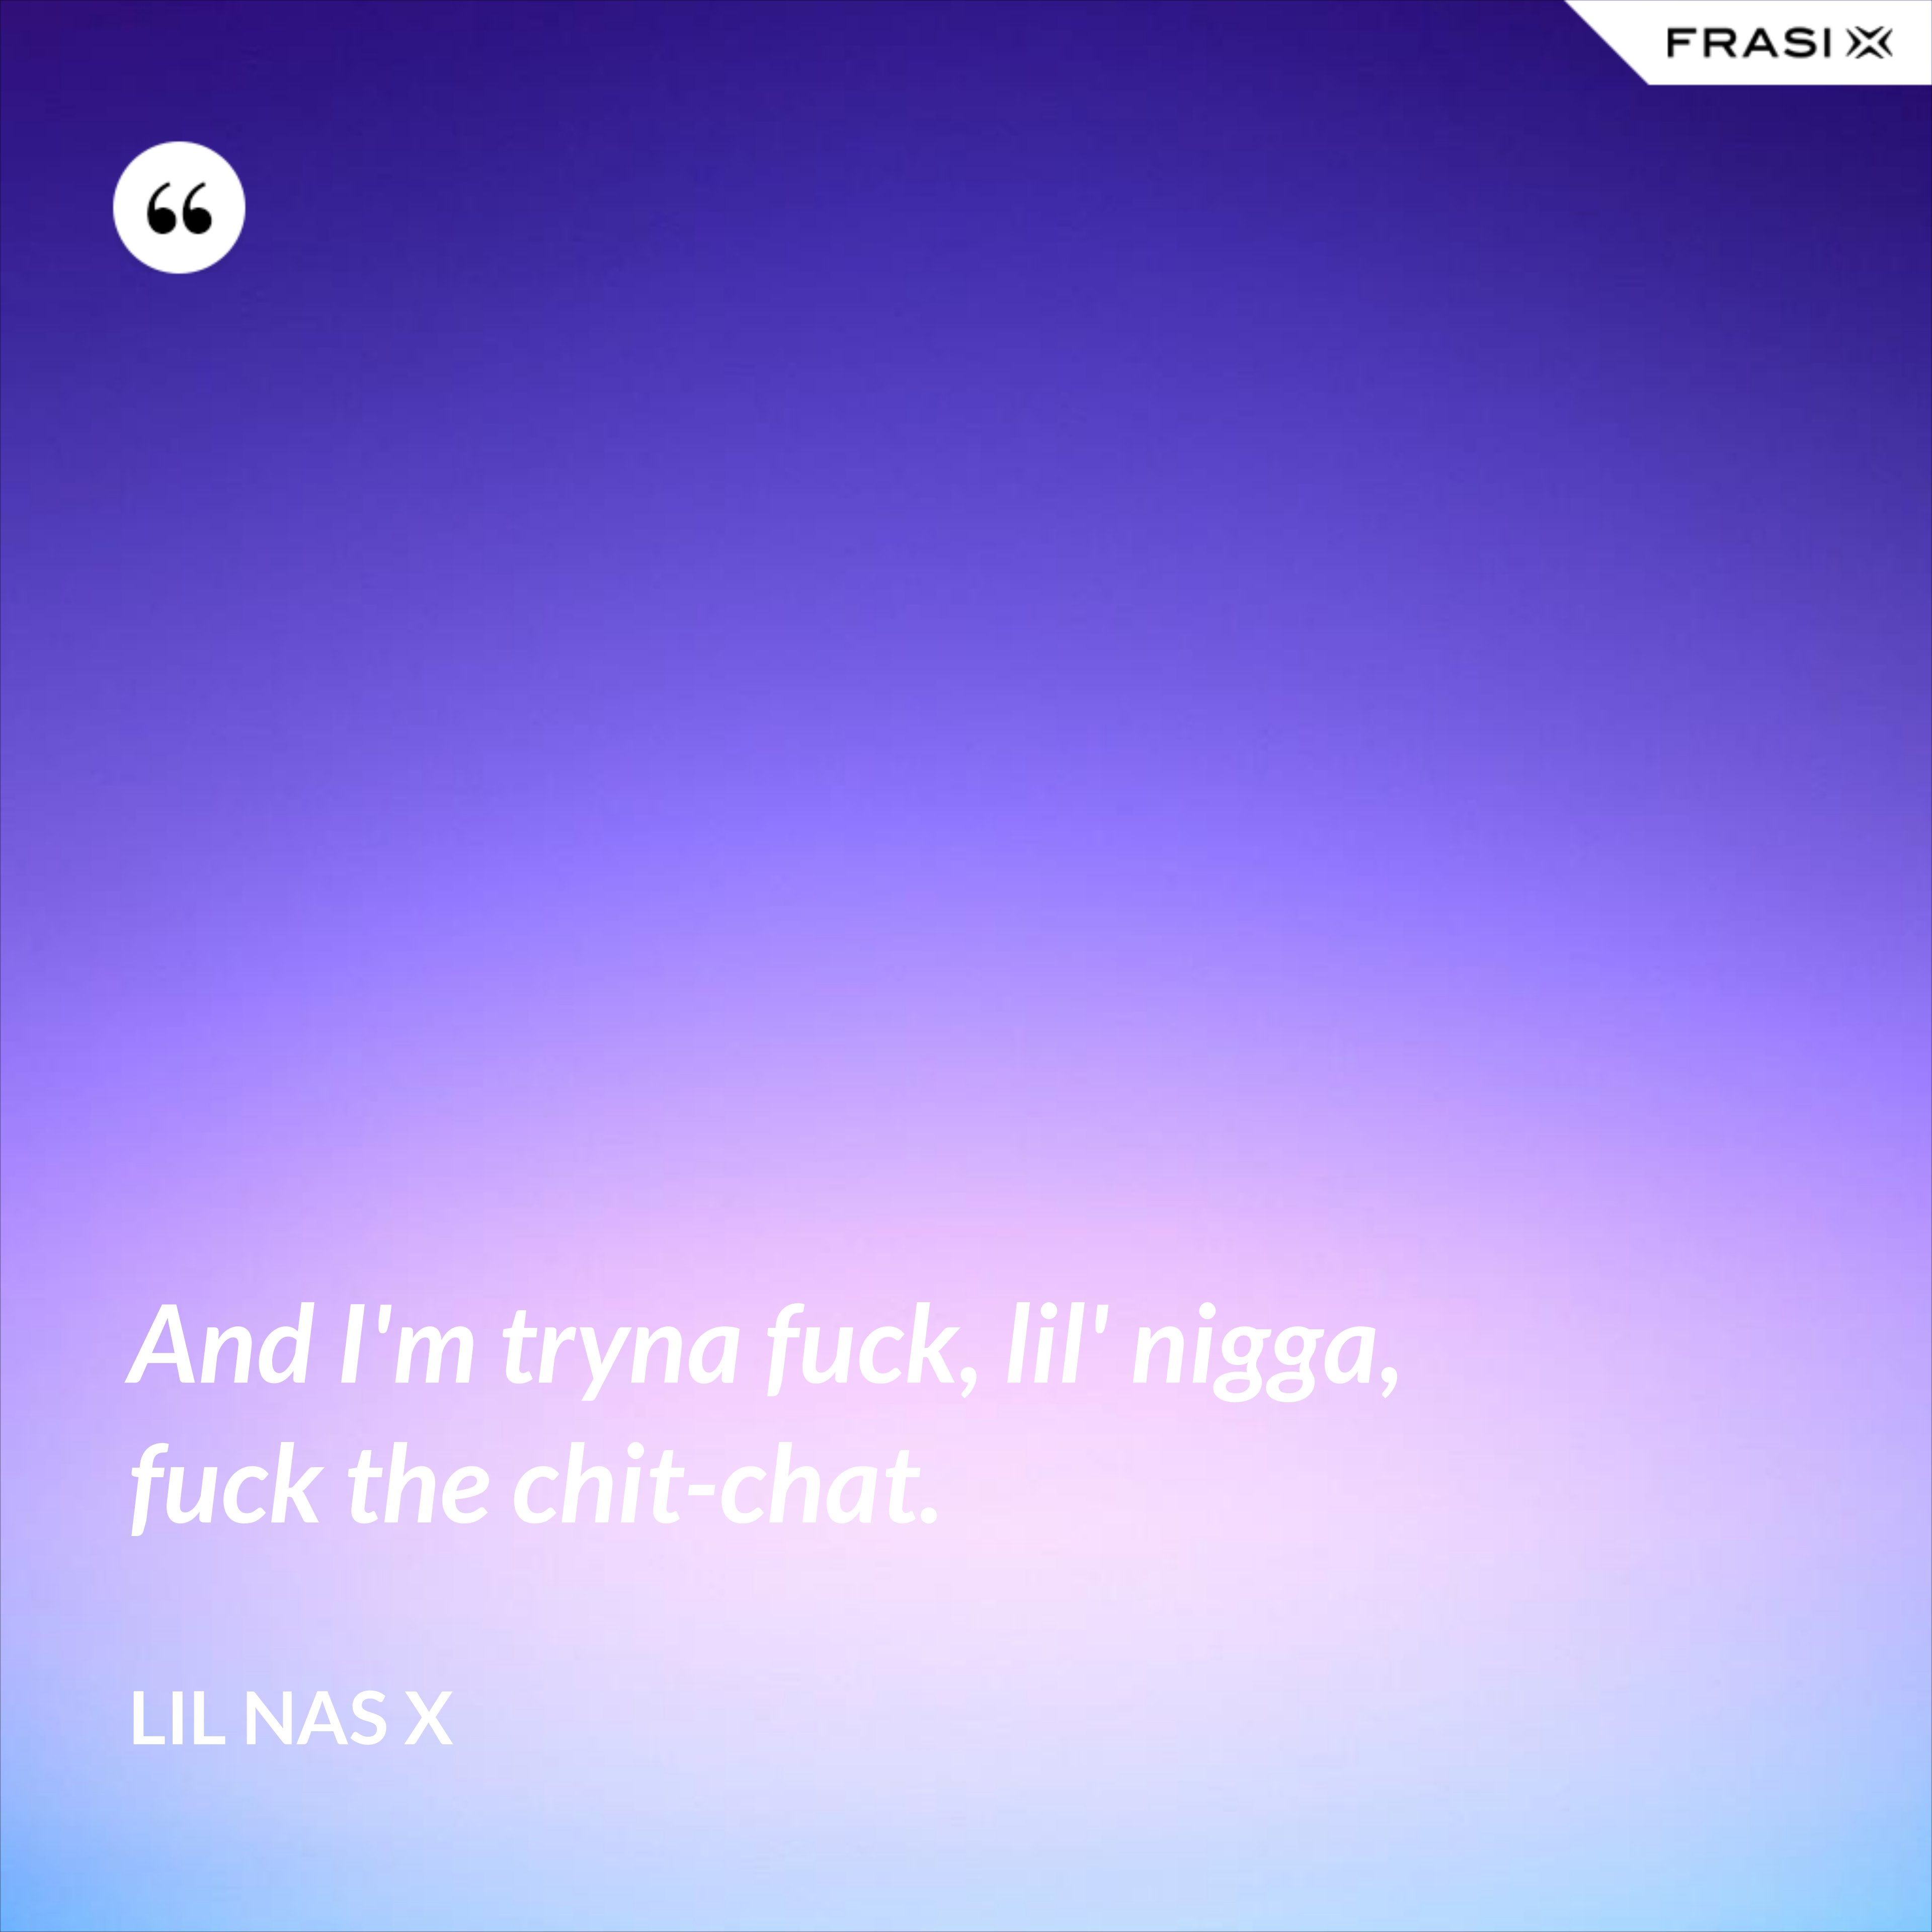 And I'm tryna fuck, lil' nigga, fuck the chit-chat. - Lil Nas X